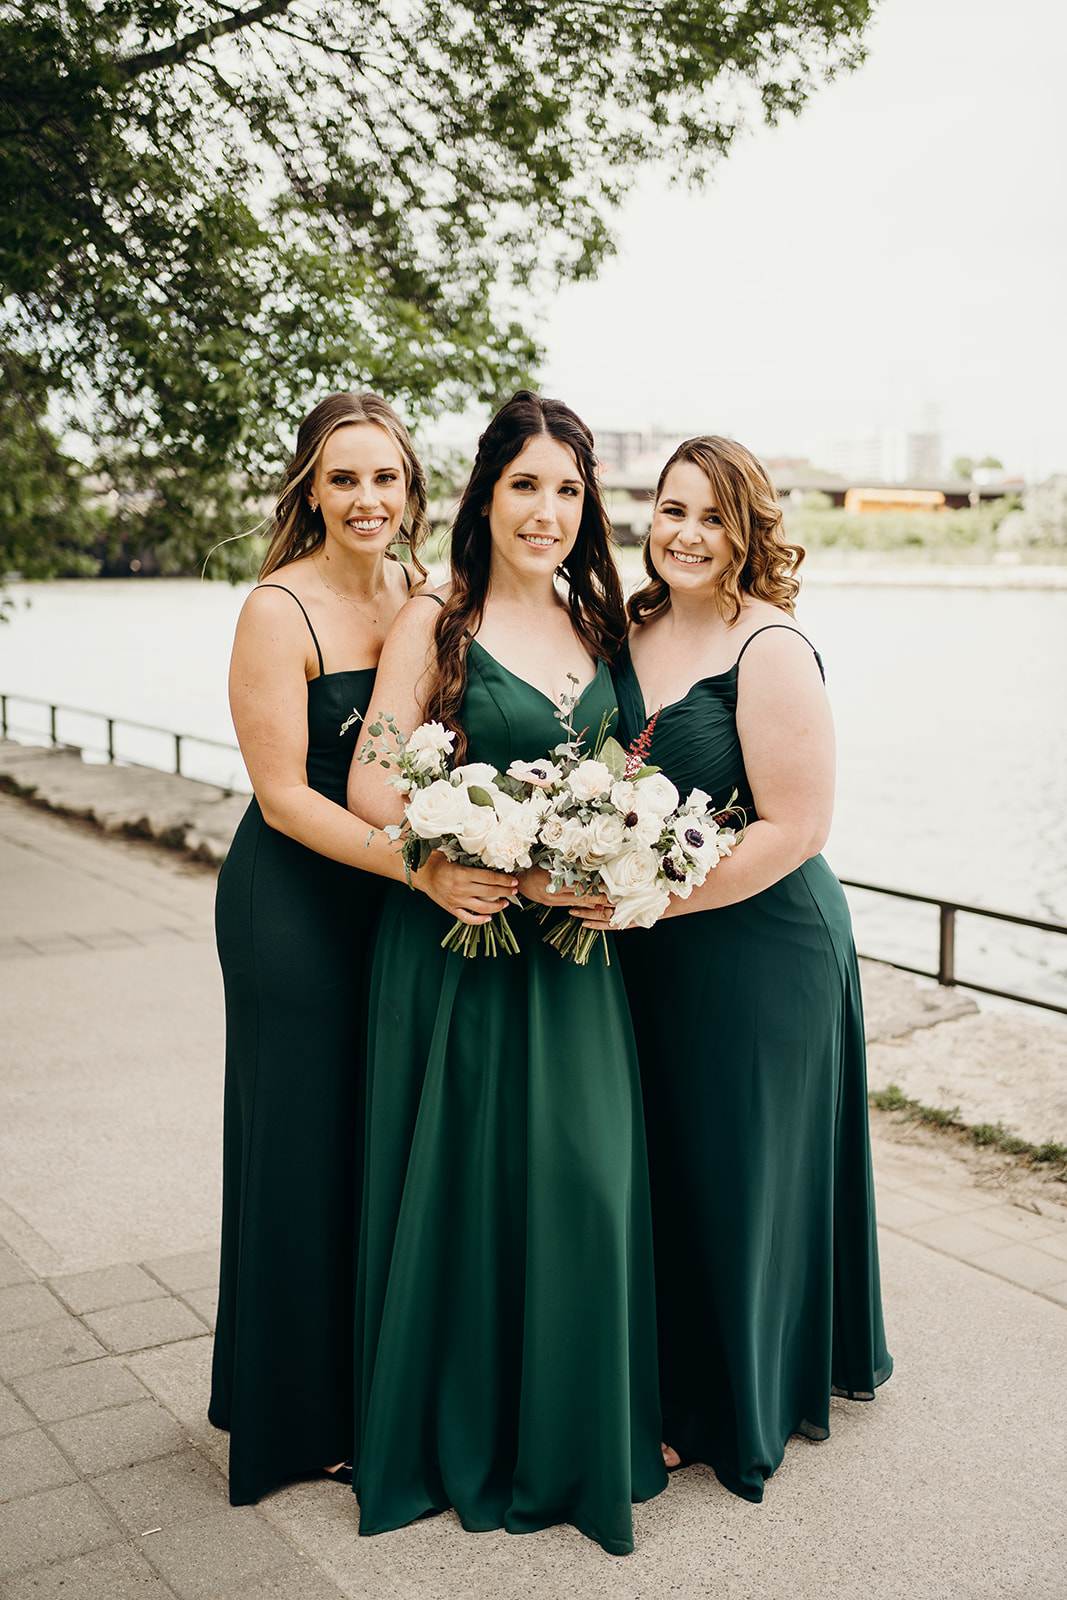 Bridesmaids in green holding their bouquets in front of each other.